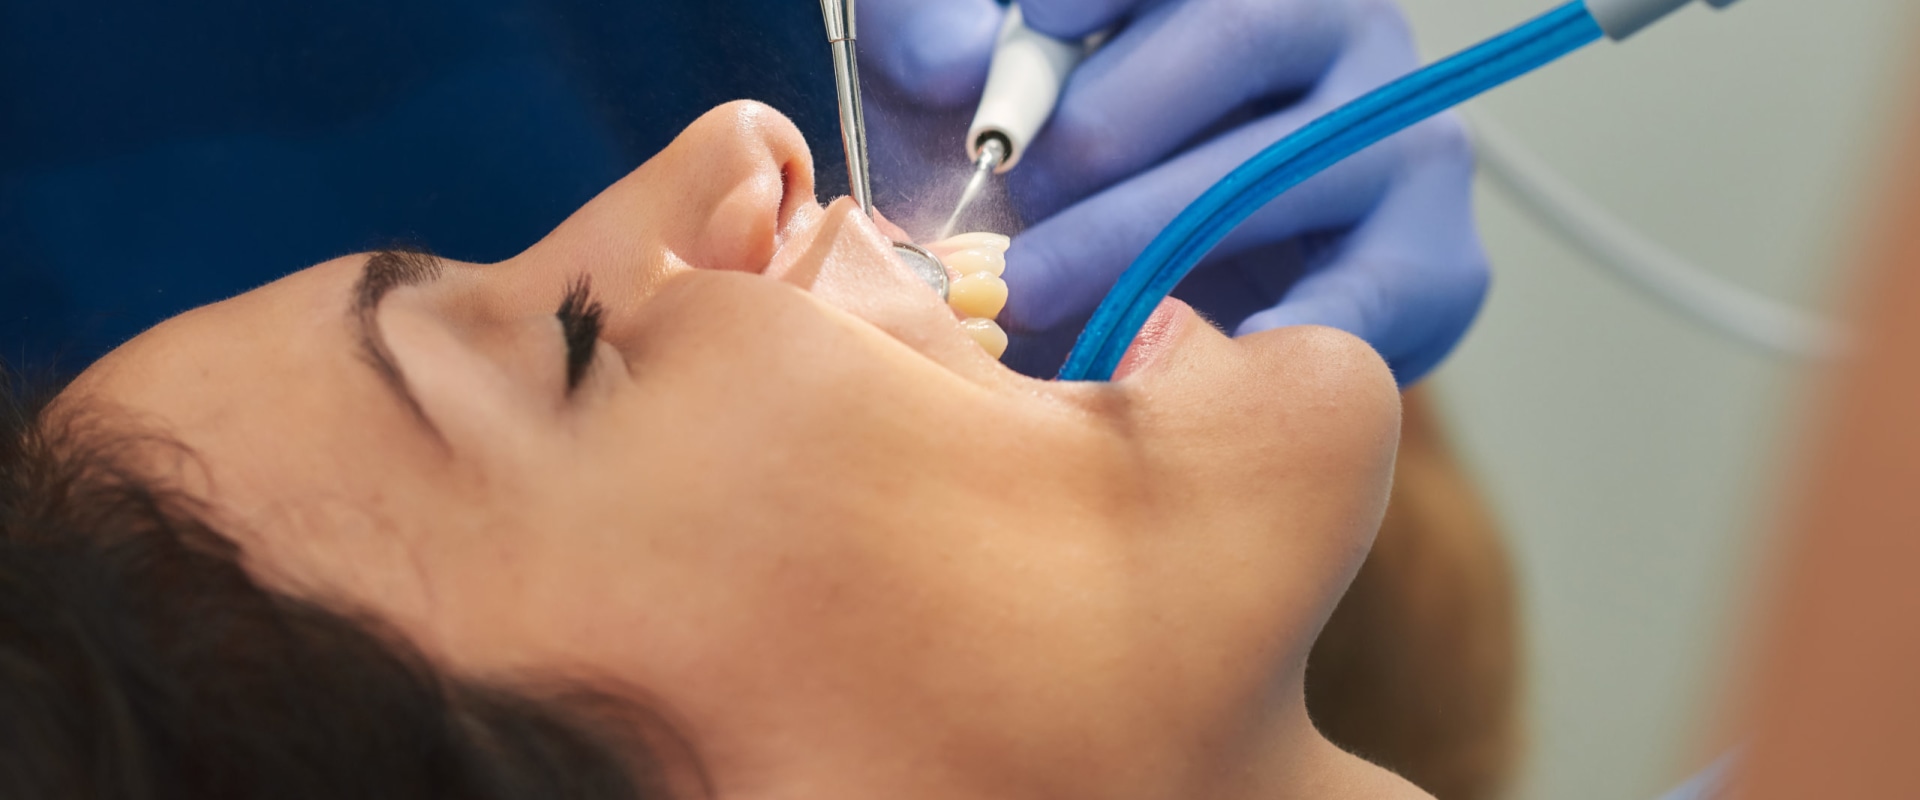 What is the most common dental procedure?